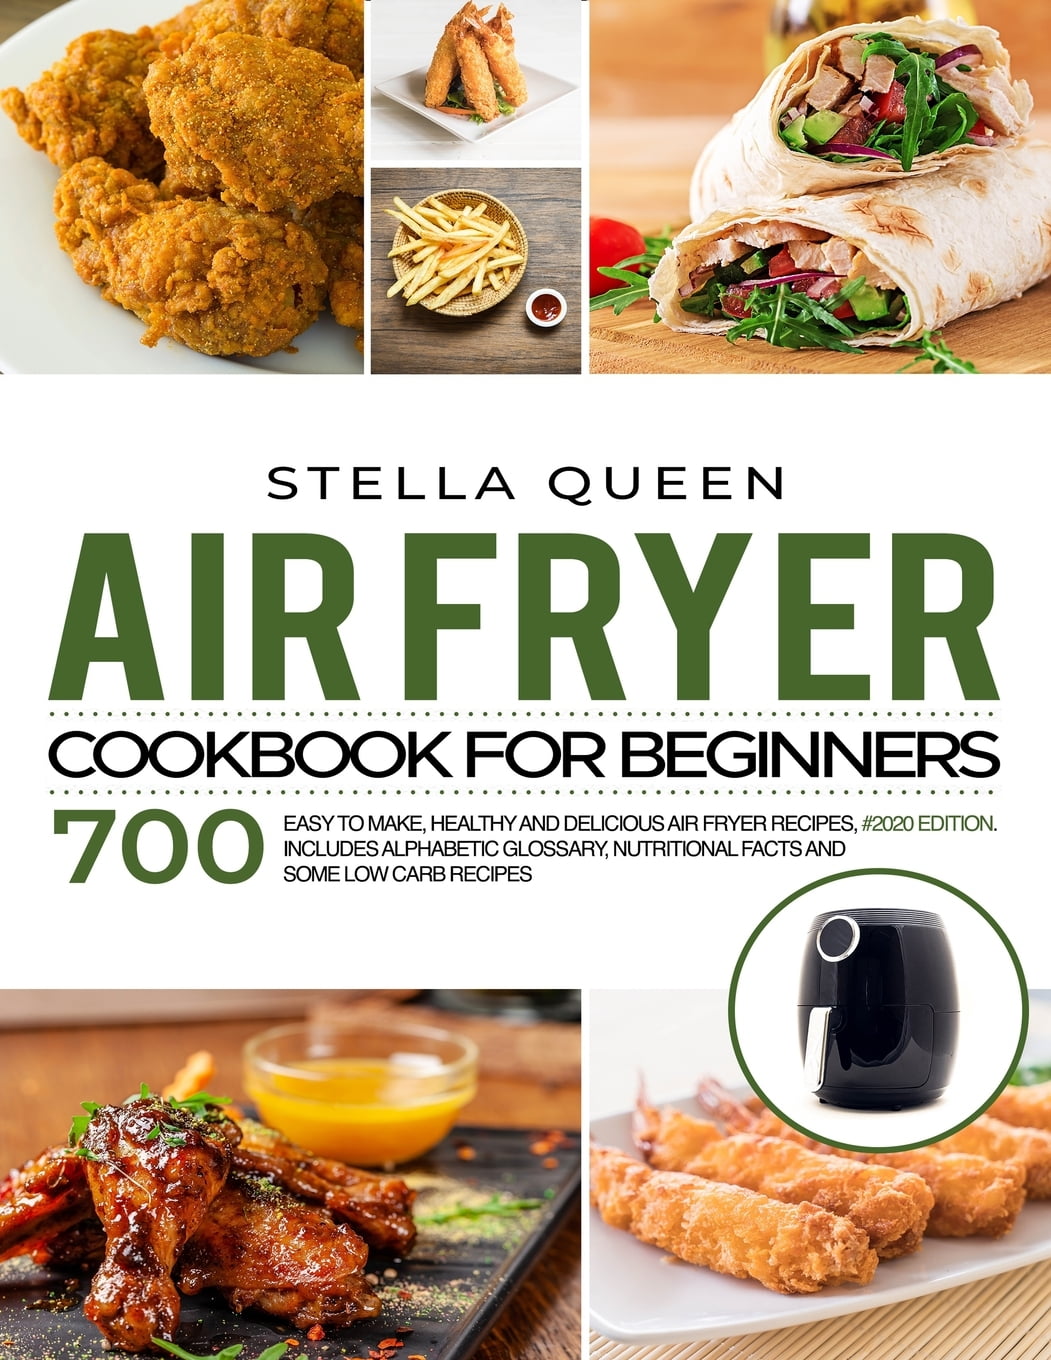 air-fryer-cookbook-for-beginners-700-easy-to-make-healthy-and